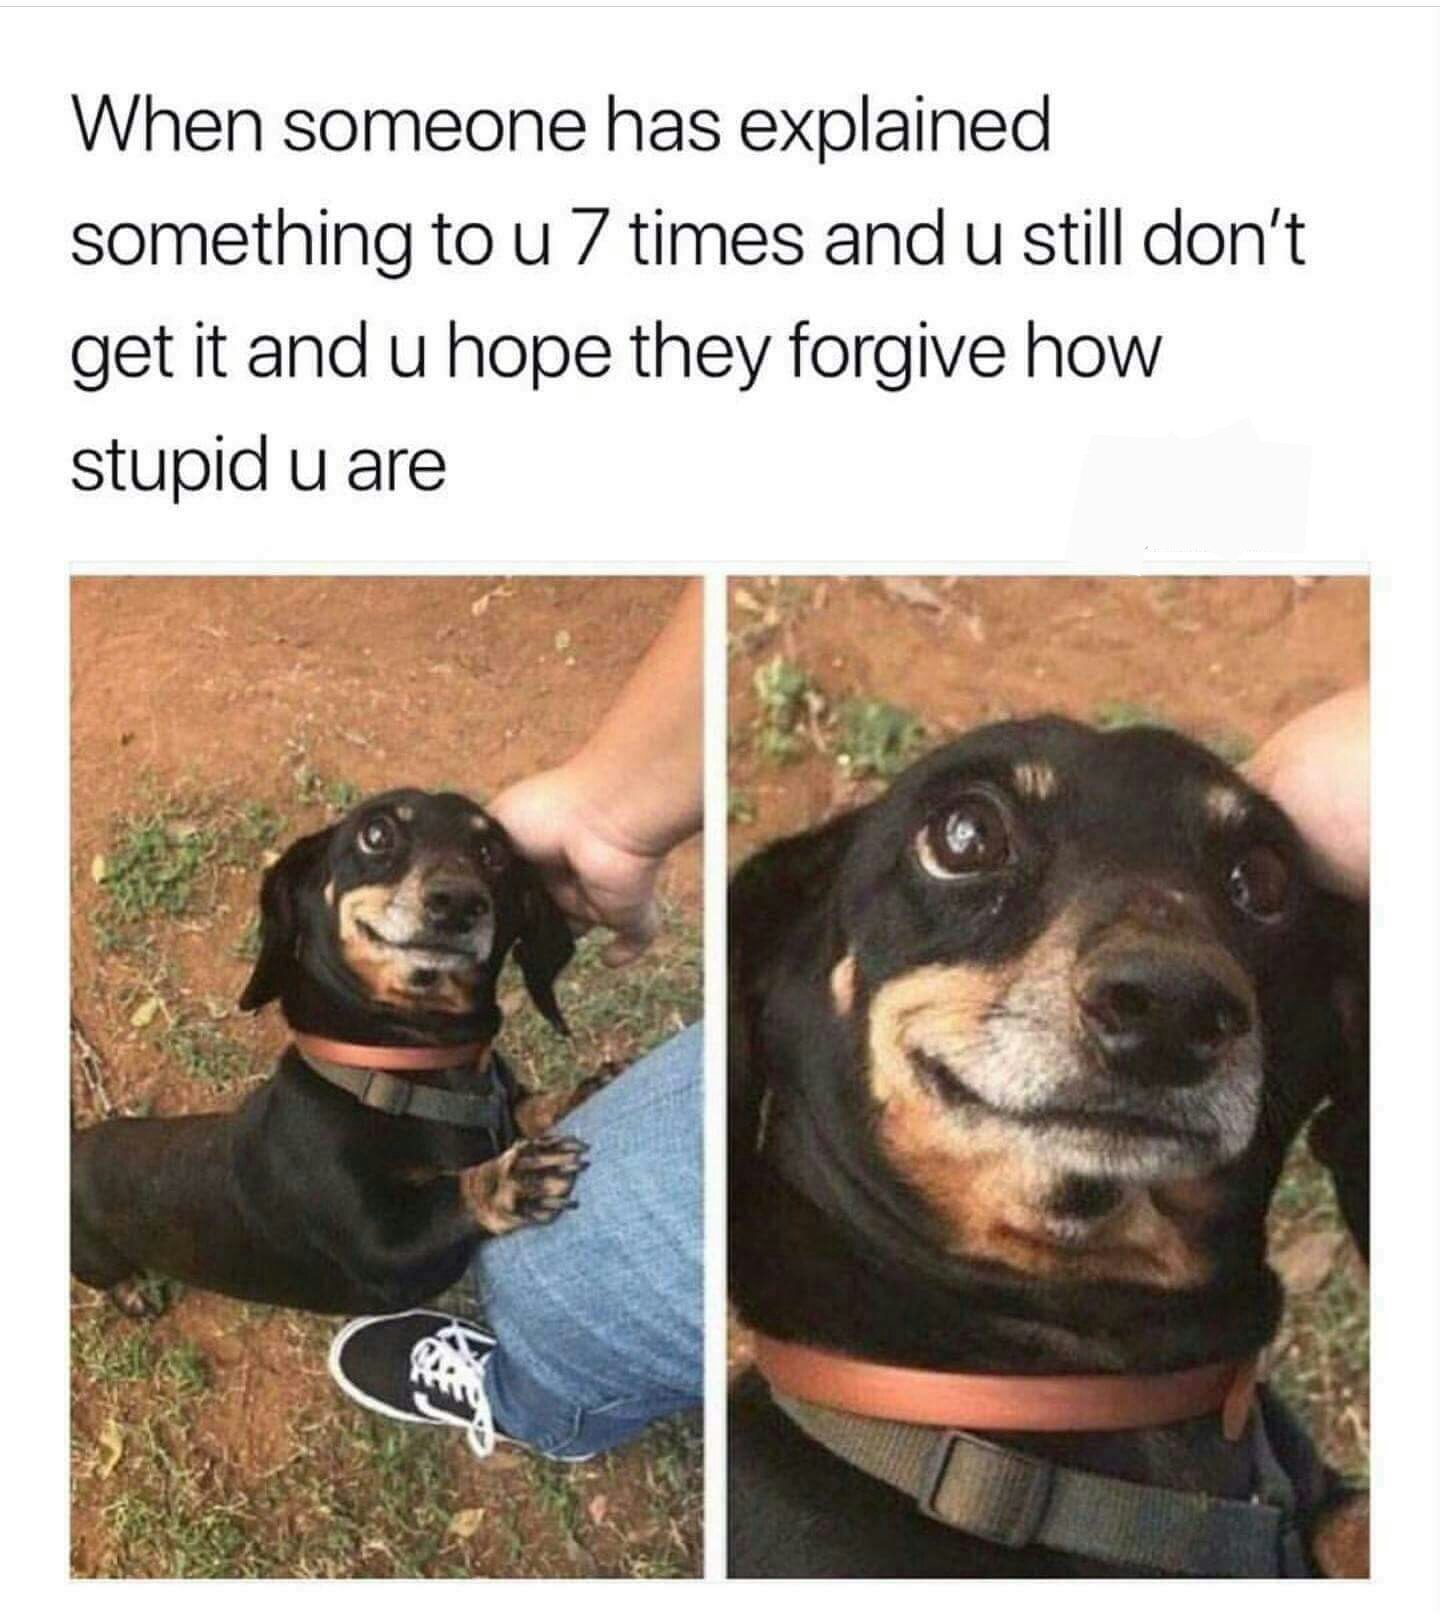 dank meme of someone has explained something to u 7 times - When someone has explained something to u 7 times and u still don't get it and u hope they forgive how stupid u are